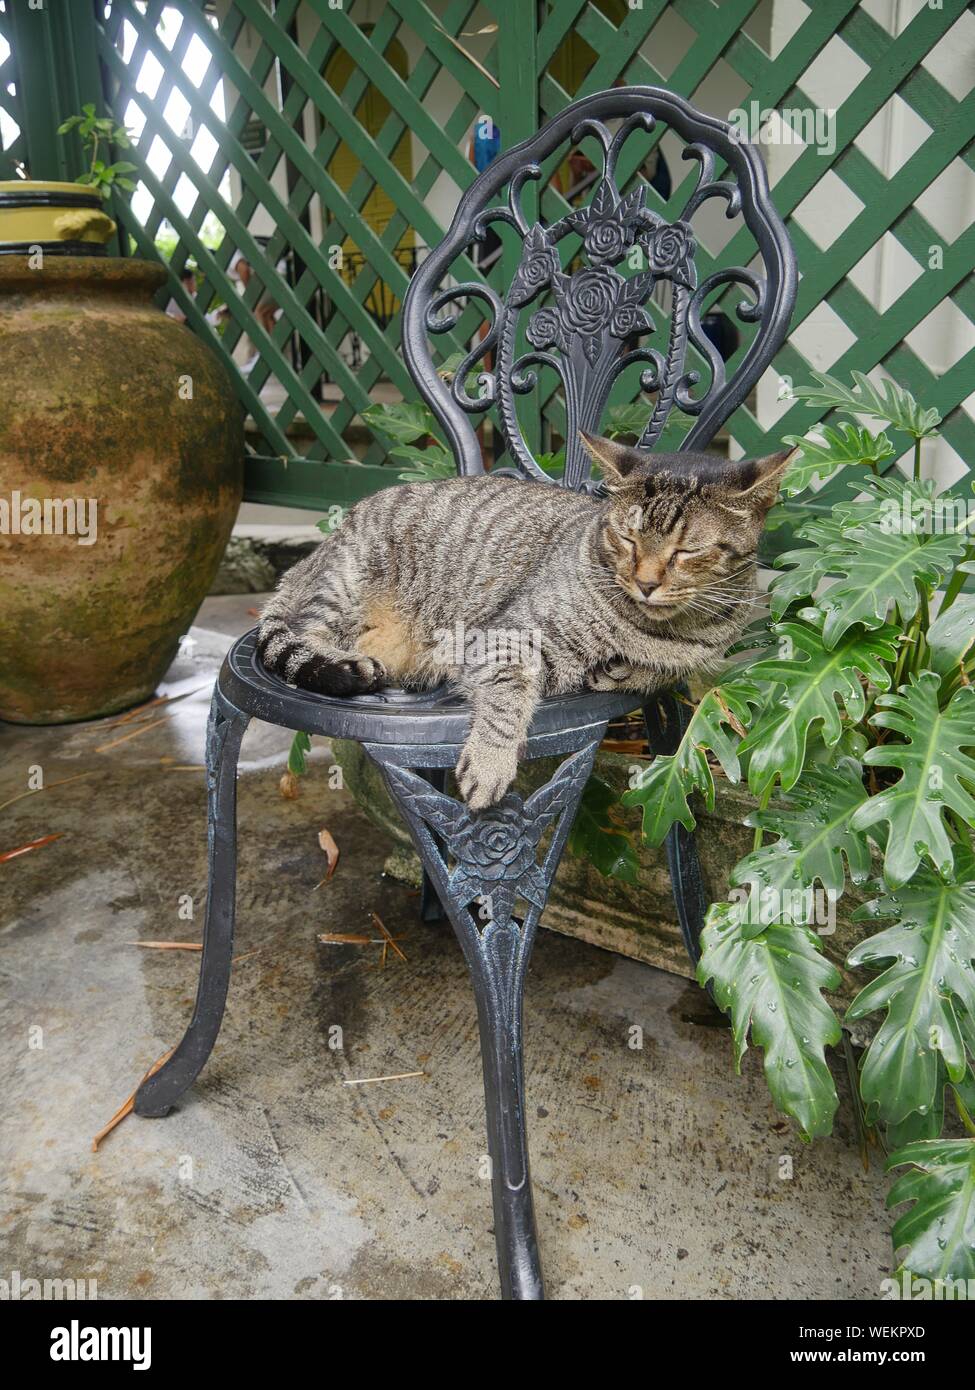 Portrait shot of a tabby cat sleeping on a steel chair at the Hemingway house in Key West, Florida. Stock Photo